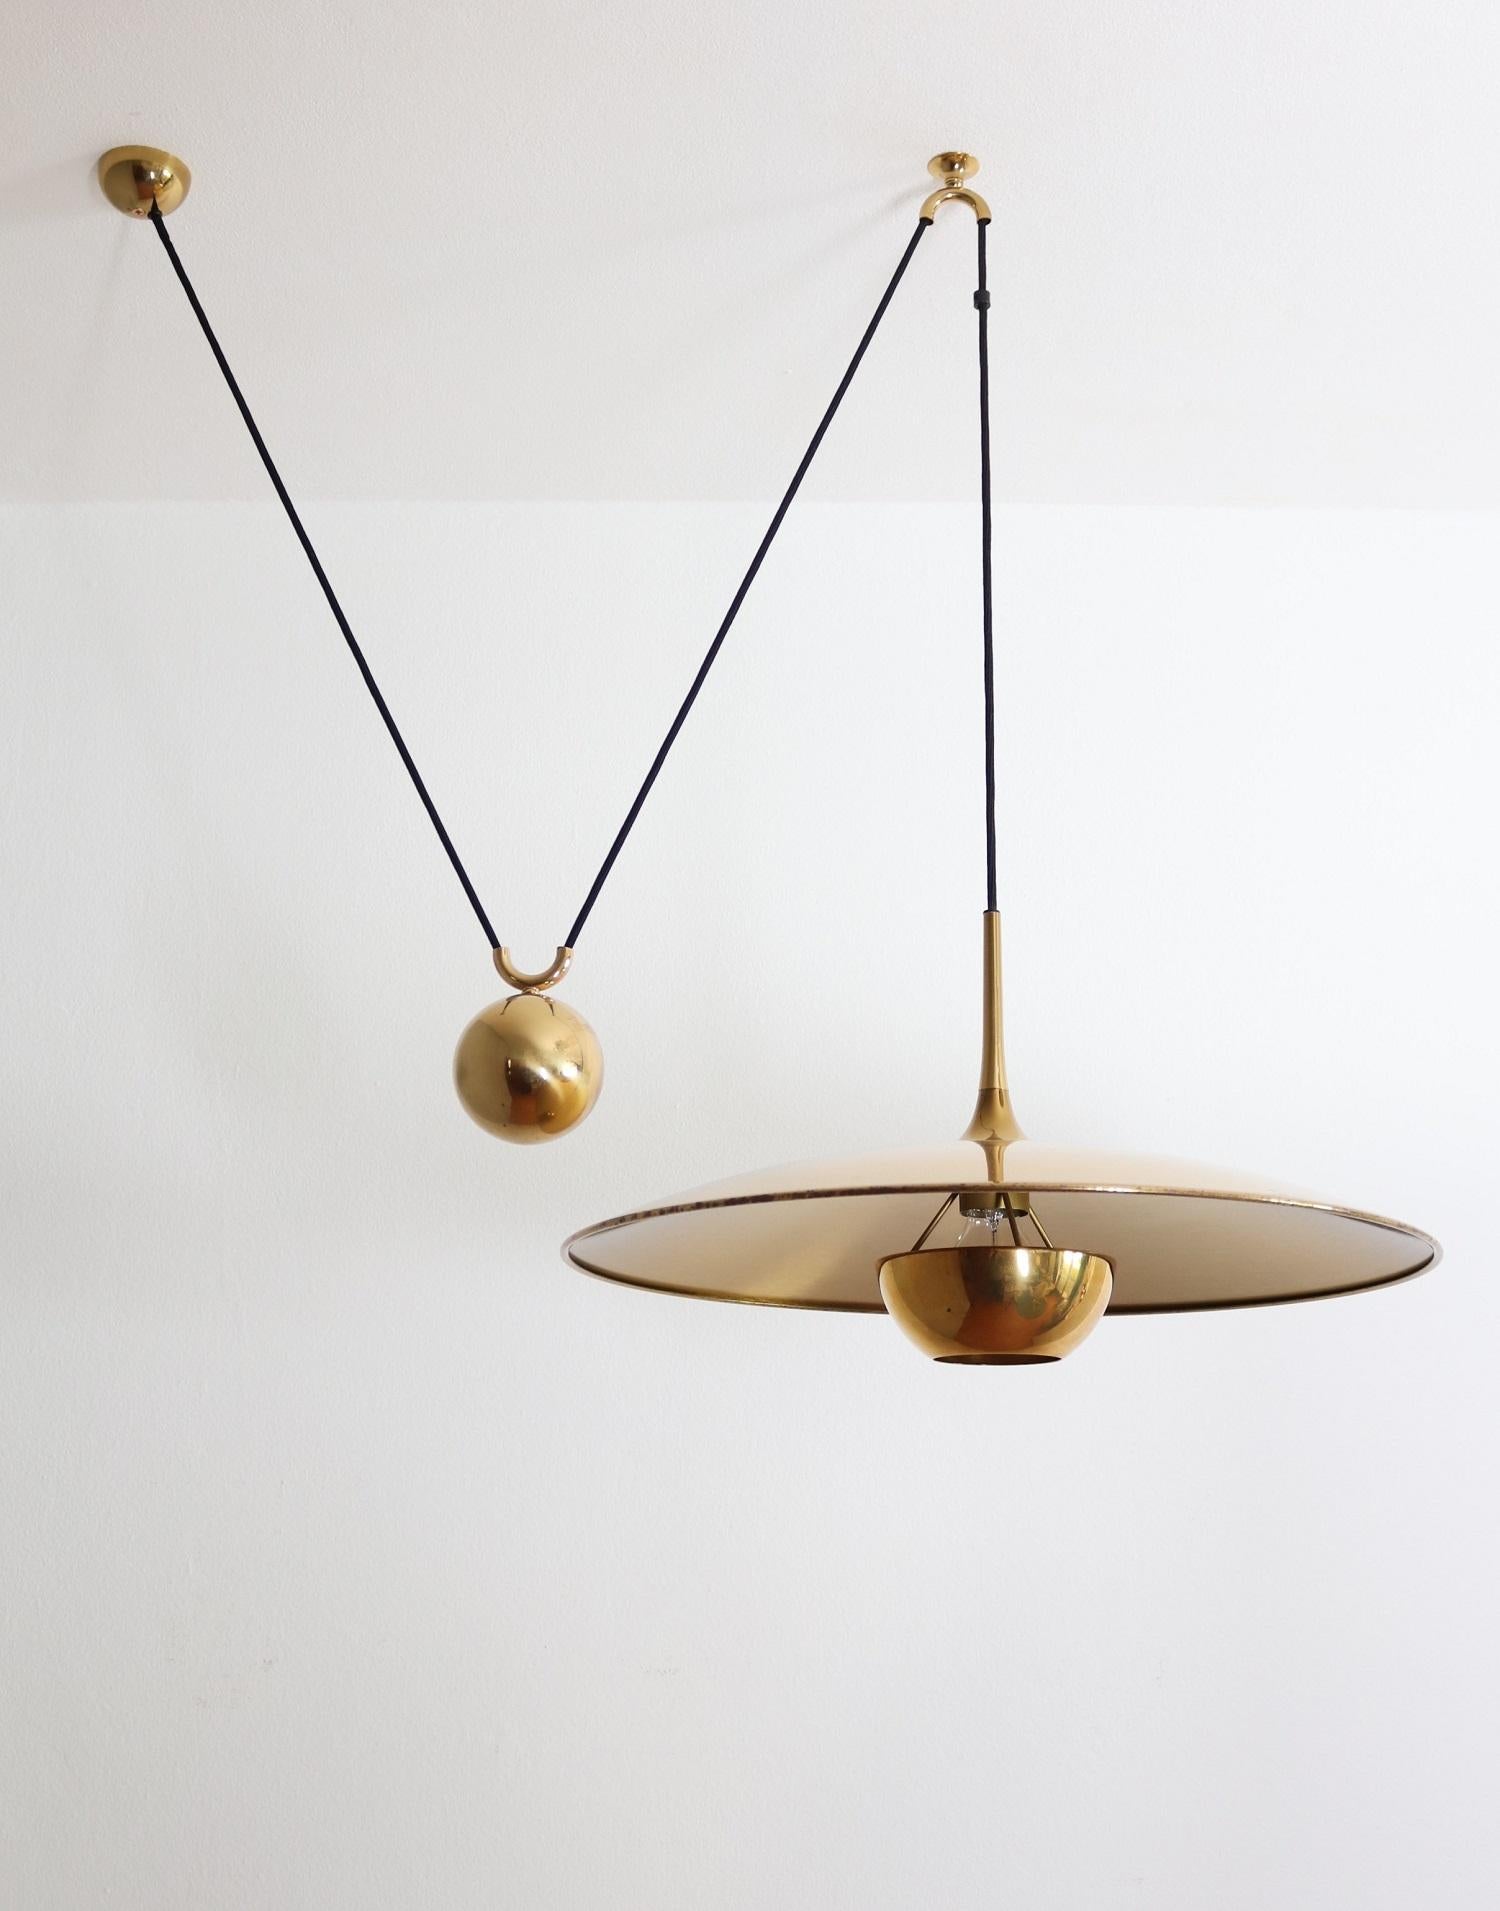 Beautiful vintage pendant light in shiny brass with heavy side counterweight to adjust the height.
Made in Germany by Florian Schulz, designed in the 1970s.

The height of the lamp can be adjusted from 80-140cm ( 31.5-55inch )
The pendant have